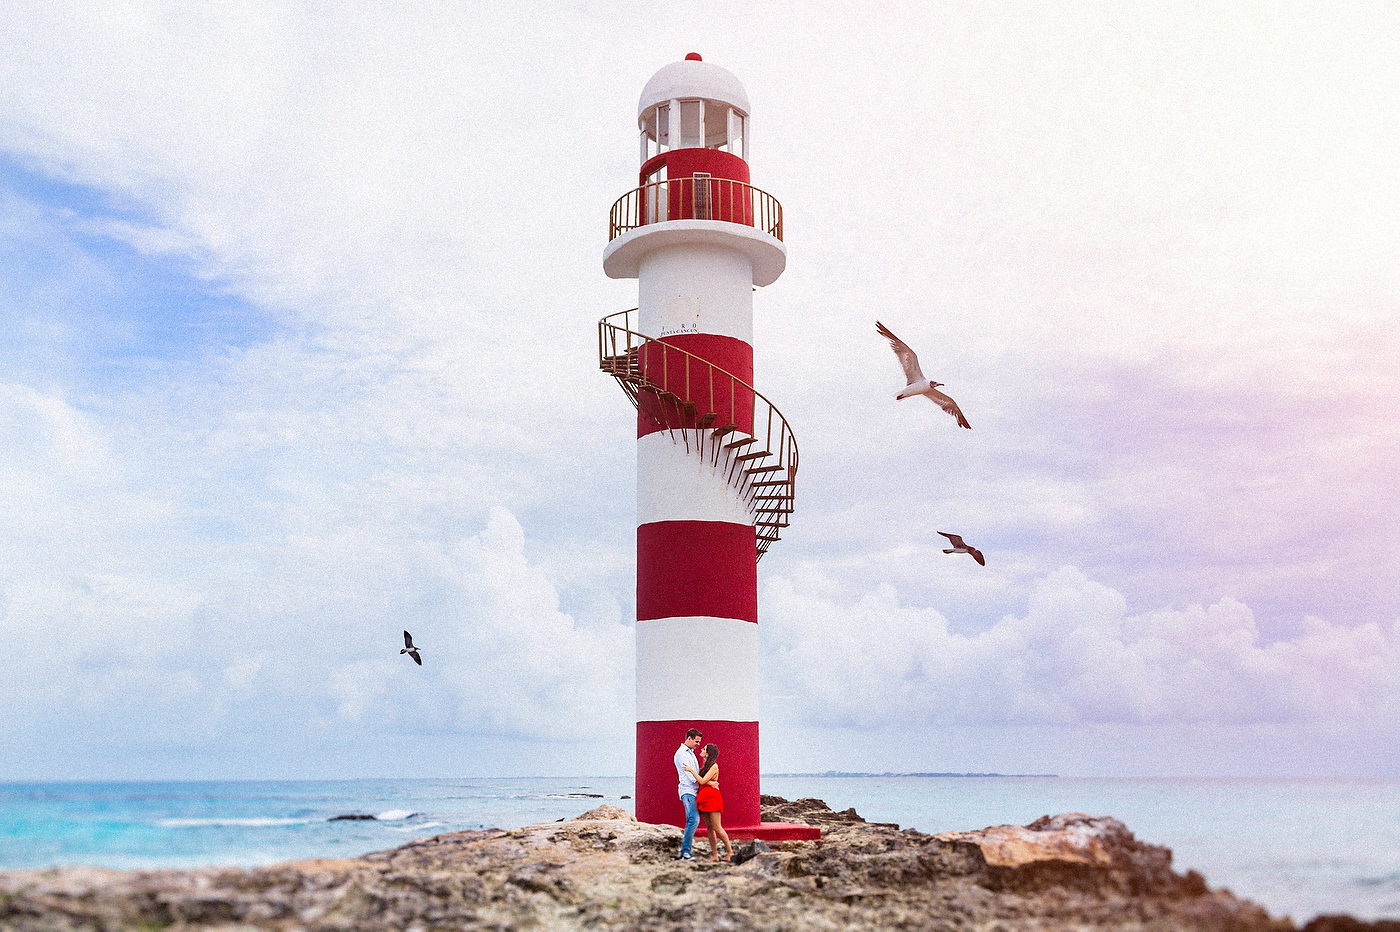 Cancun engagement photos with iconic lighthouse at Hyatt Ziva by Jhankarlo Photography